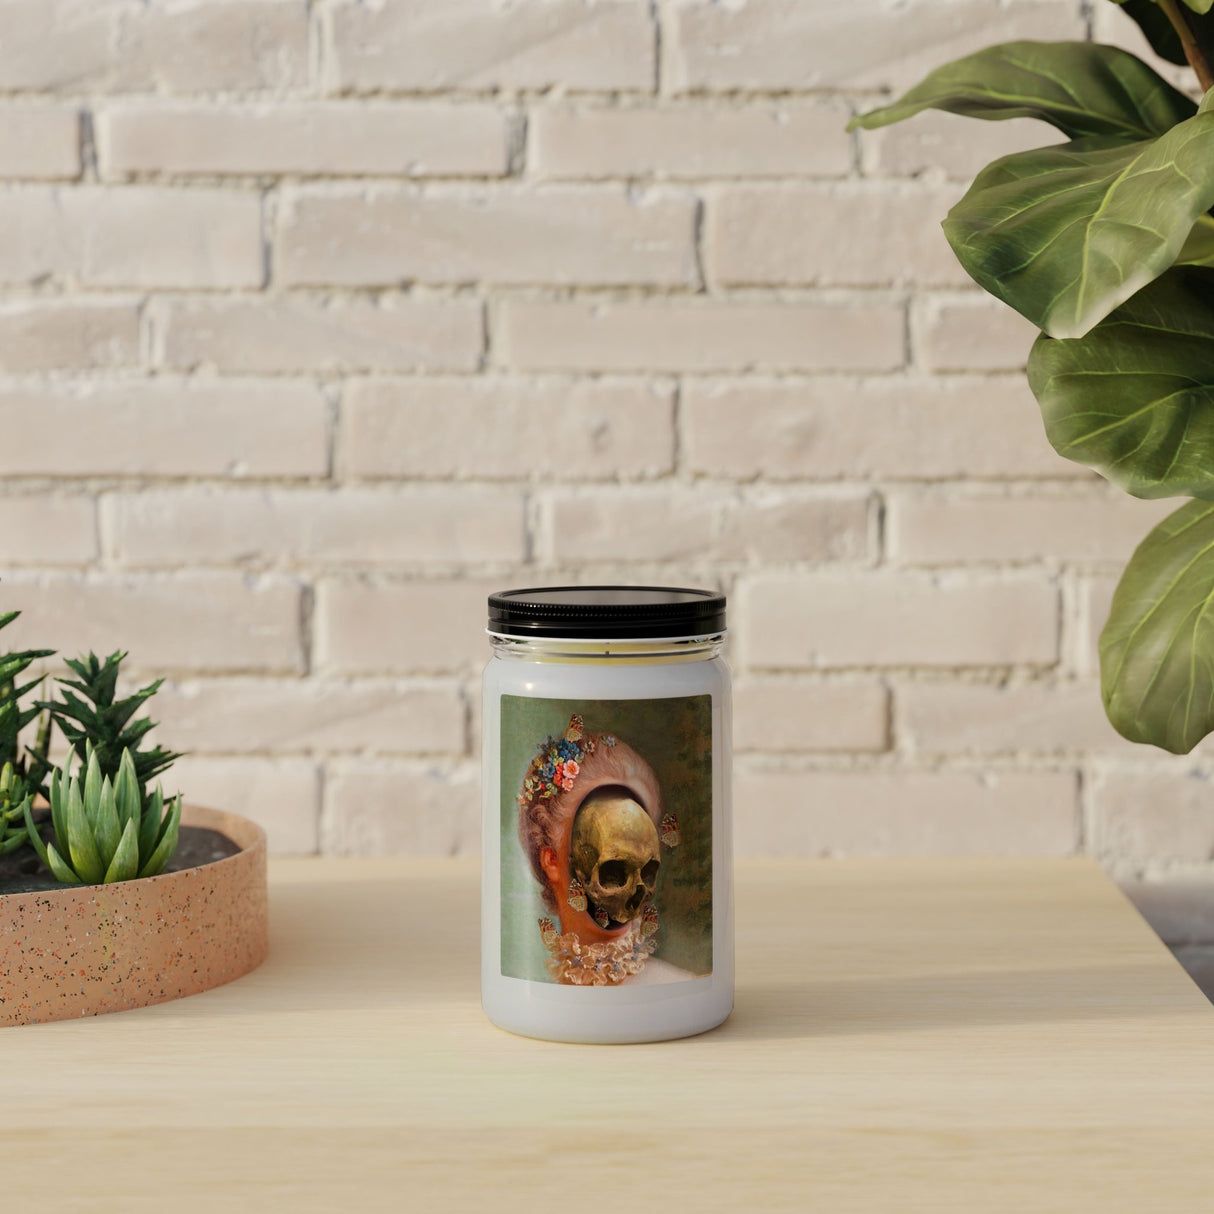 Welder Wings Scented Candle in Mason Jar: The Brief Life - Candlefy